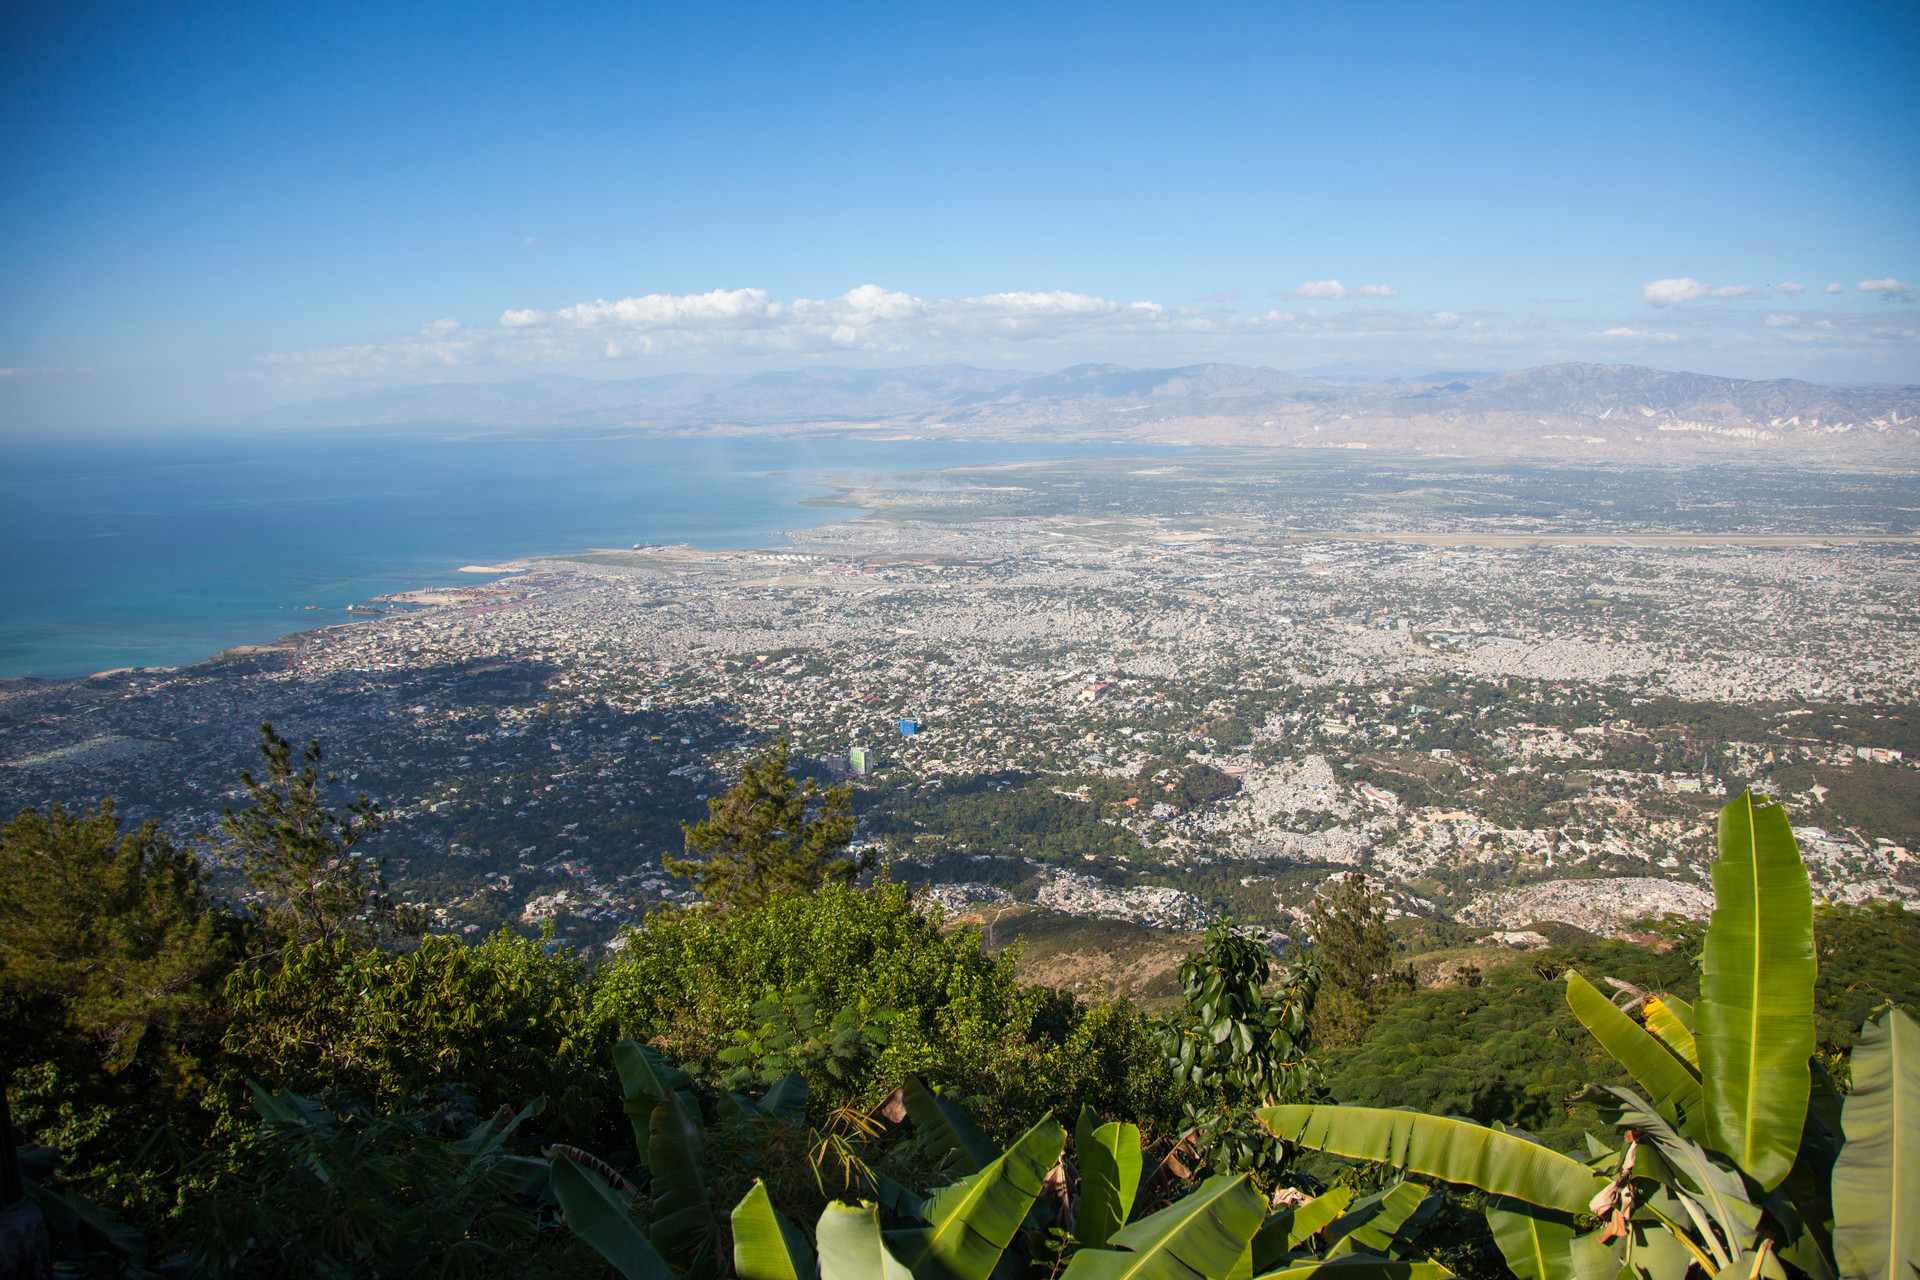 Highlights of the Port au Prince